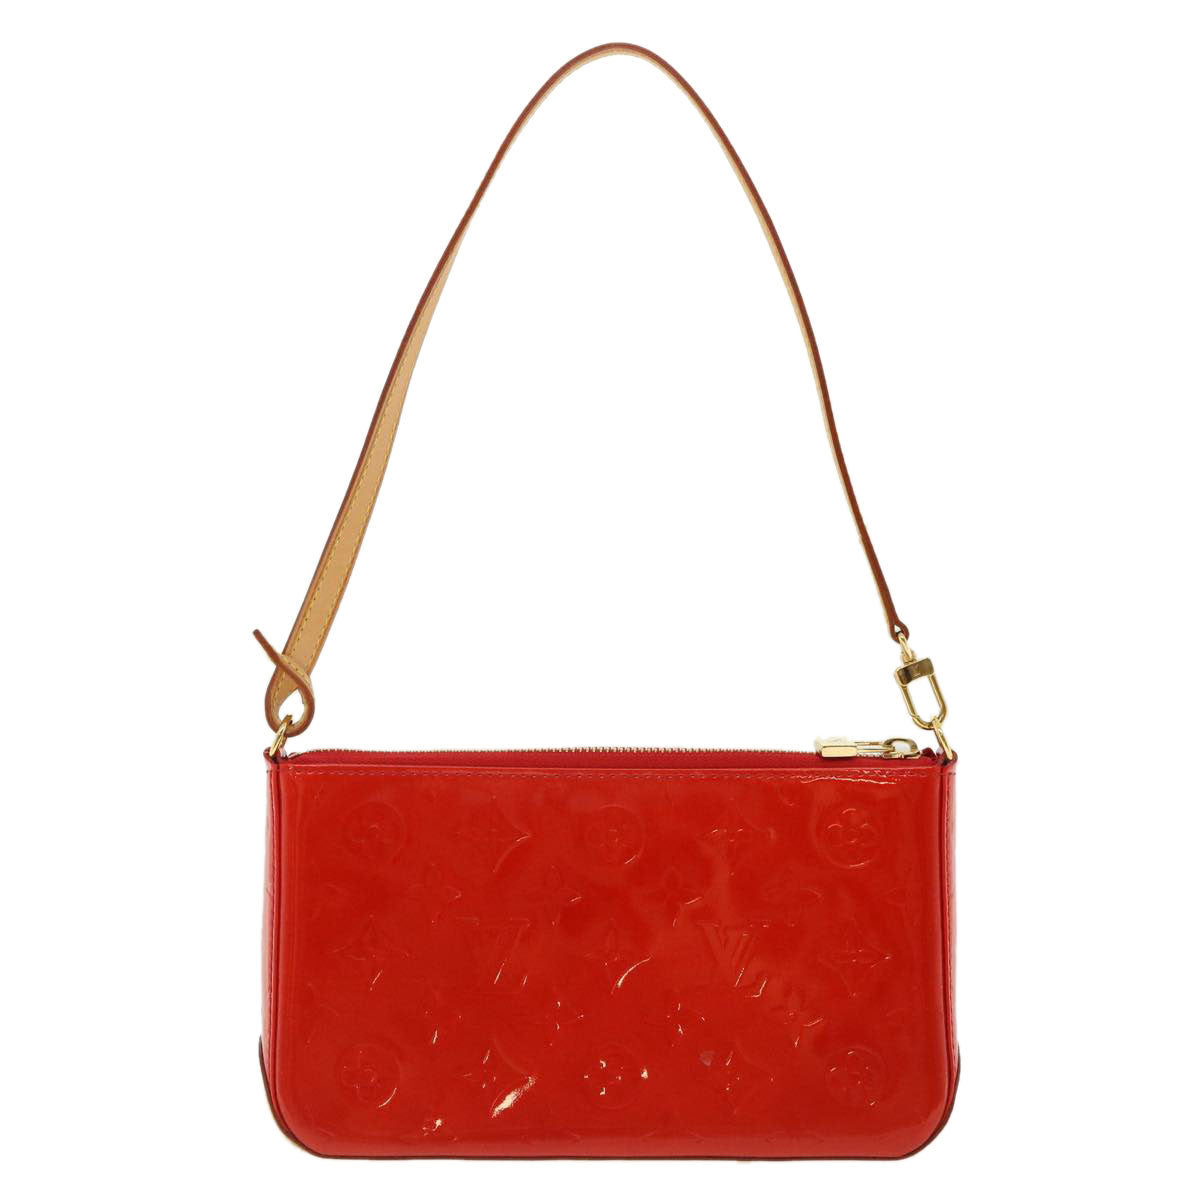 LOUIS VUITTON Monogram Vernis marly square Hand Bag Red LV Auth 31837A - 0